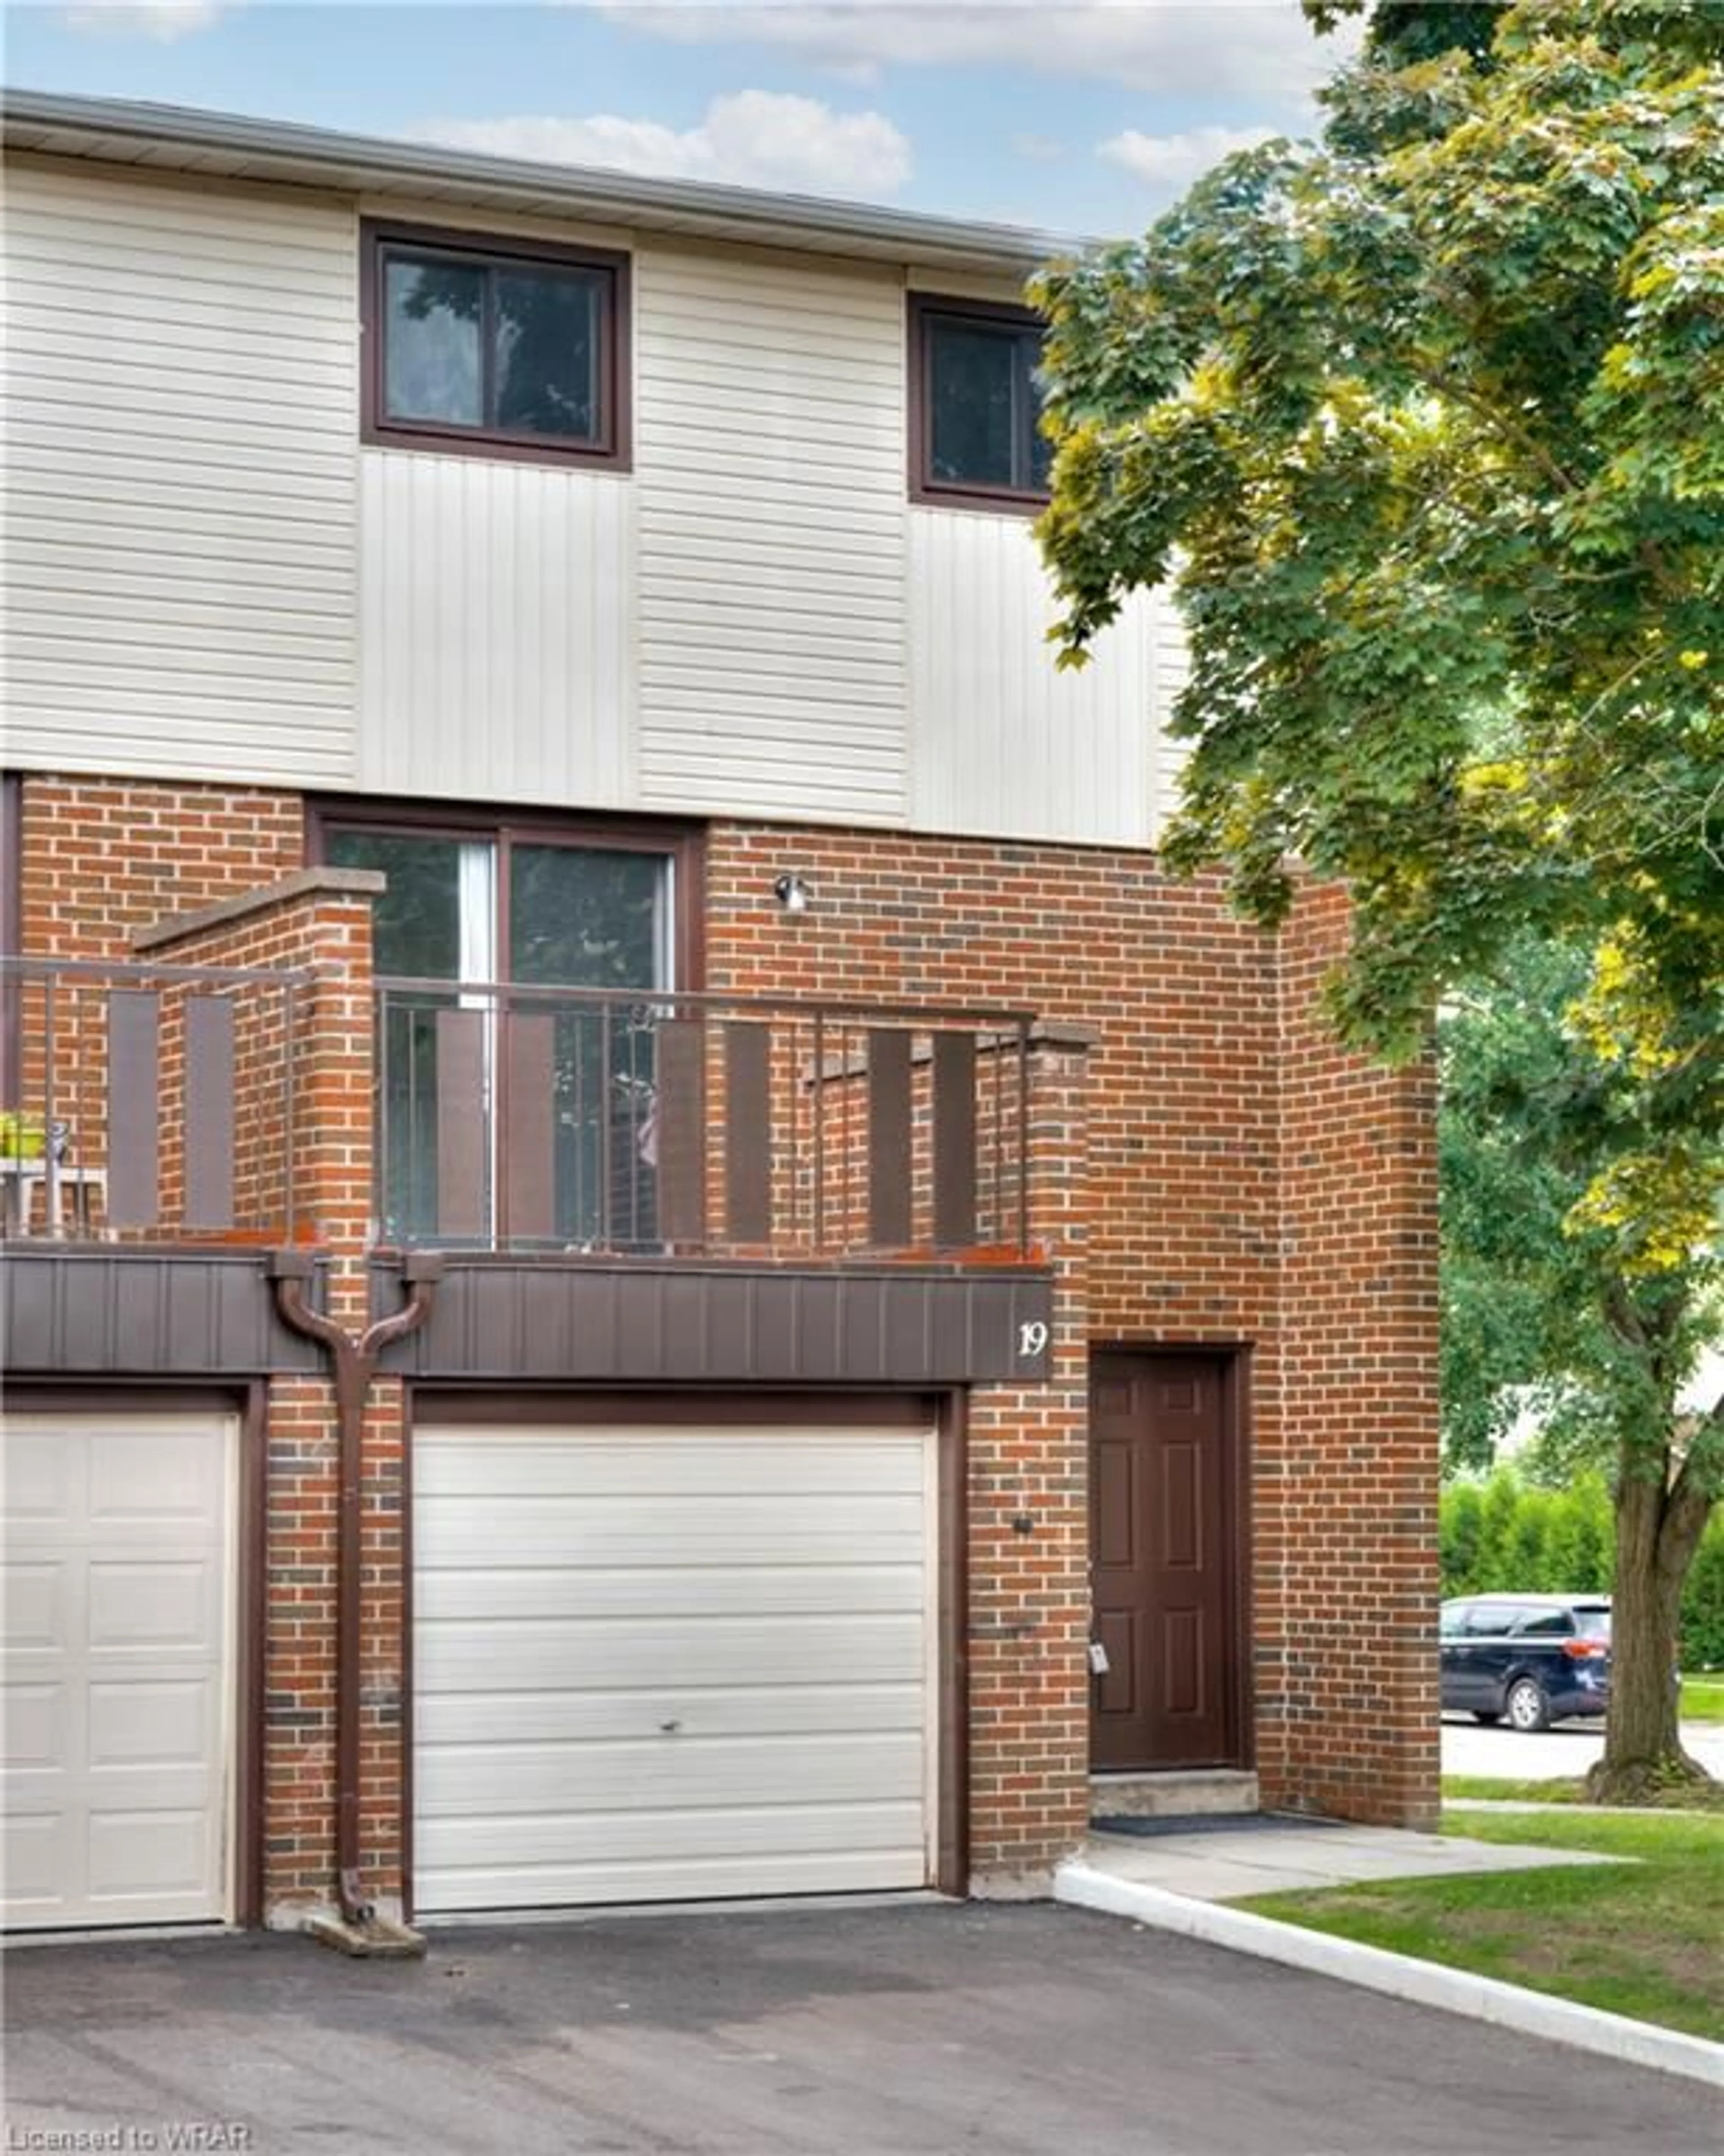 Home with brick exterior material for 190 Grulke St #19, Kitchener Ontario N2A 1T1